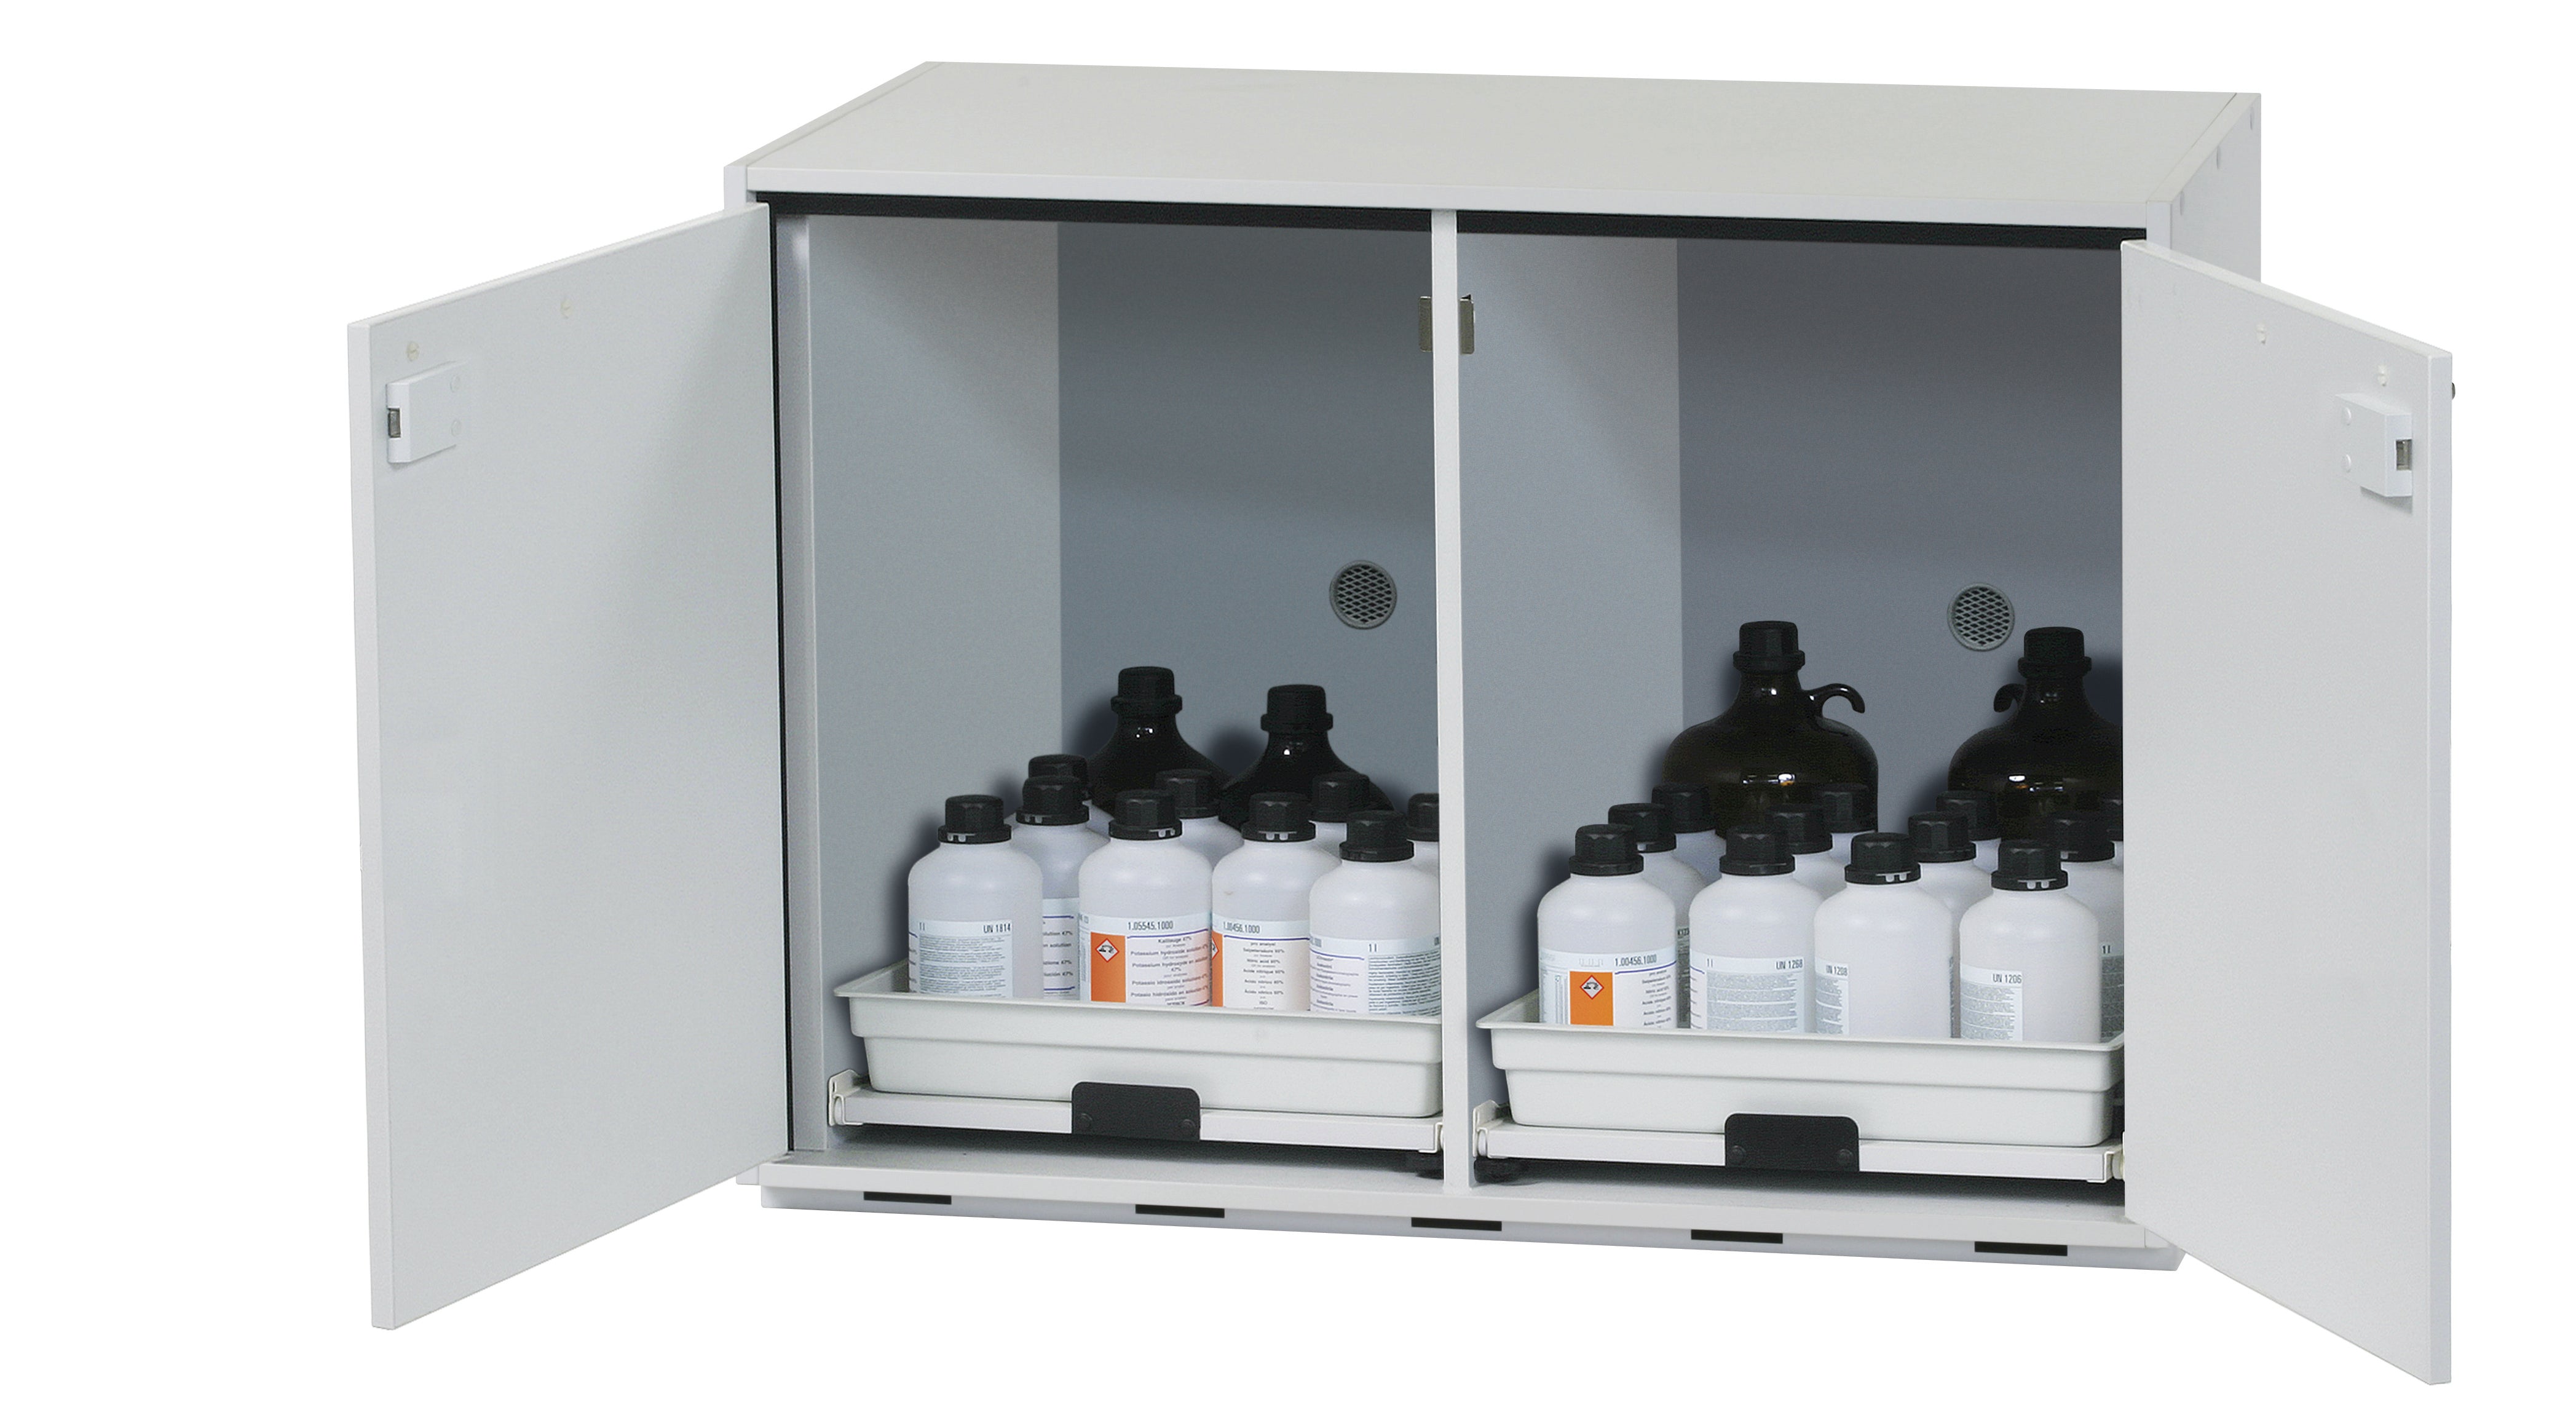 Acid and alkali base cabinet SL-CLASSIC-UB model SL.080.110.UB.2T in light gray with 2x AbZ shelf pull-out (FP plate/polypropylene)